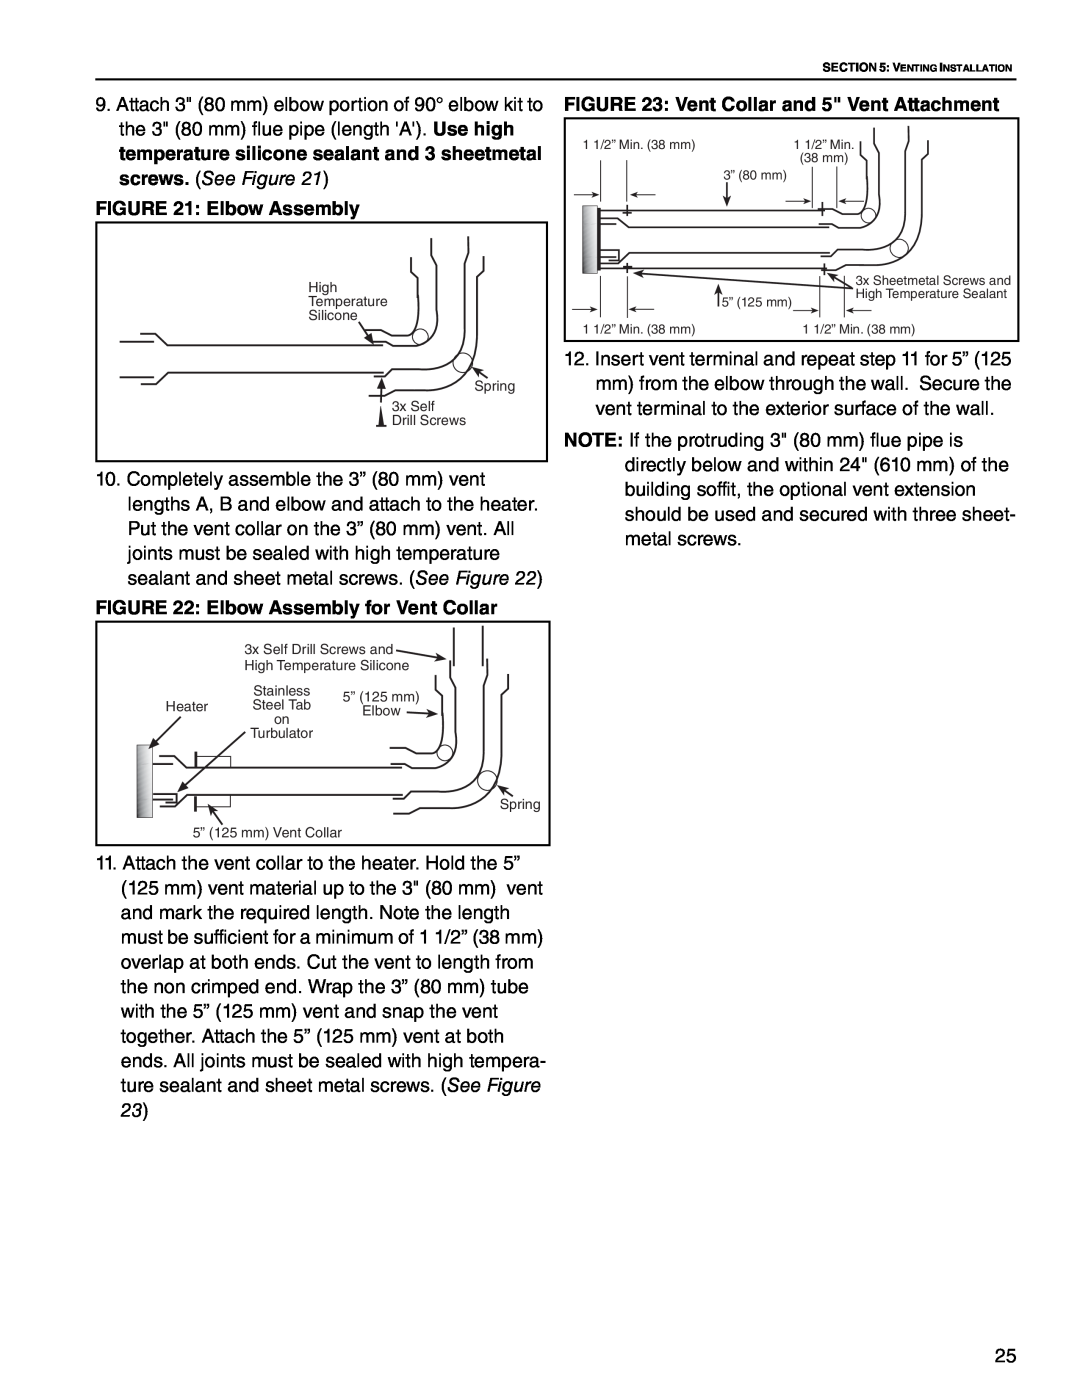 Roberts Gorden CGTH-50, CGTH-30, CGTH-40 service manual Elbow Assembly for Vent Collar, Vent Collar and 5 Vent Attachment 